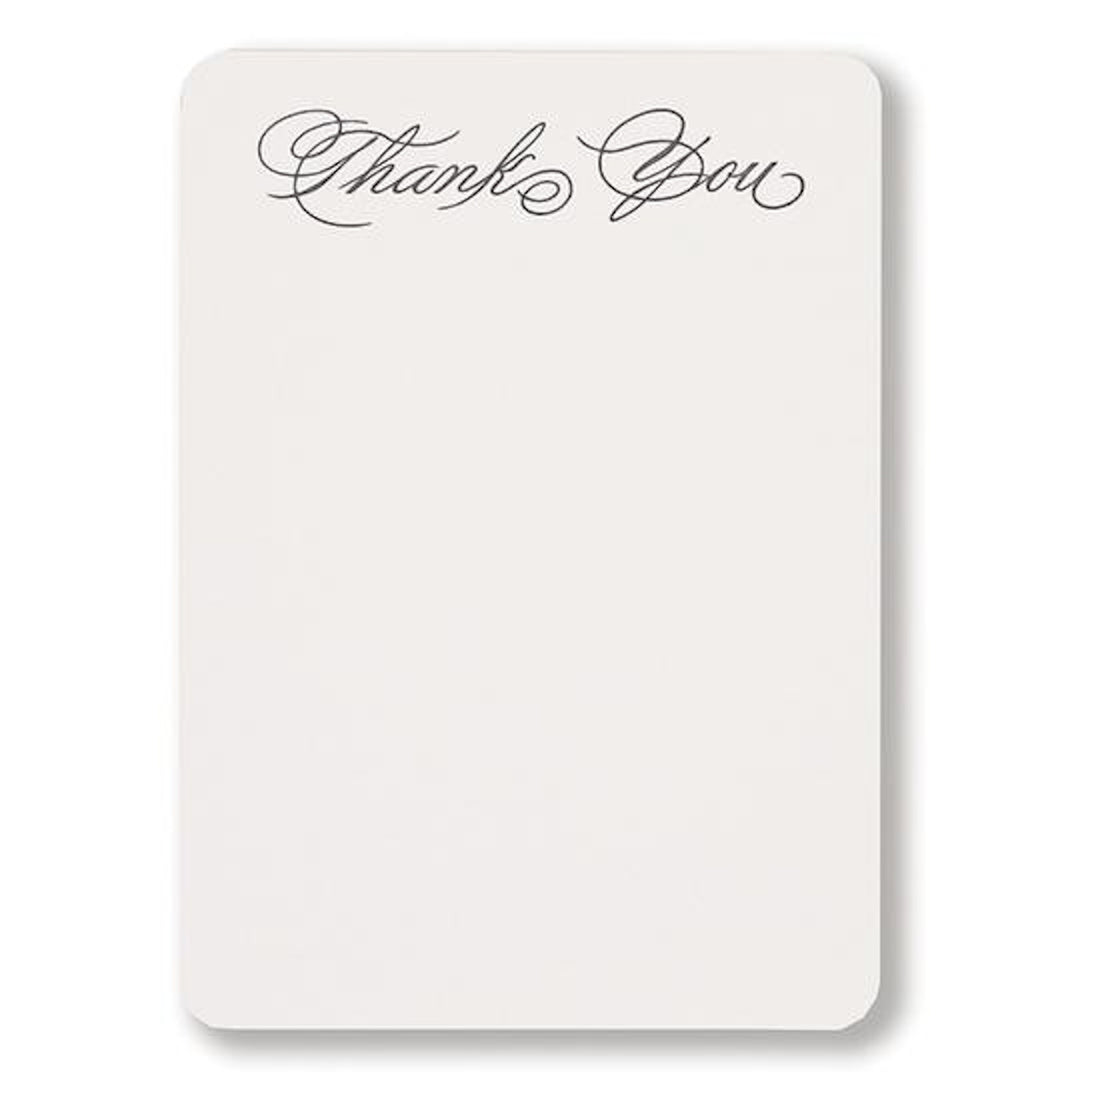 A white Thank You Script- Boxed Tails notecard with black lettering by Folio Press &amp; Paperie.